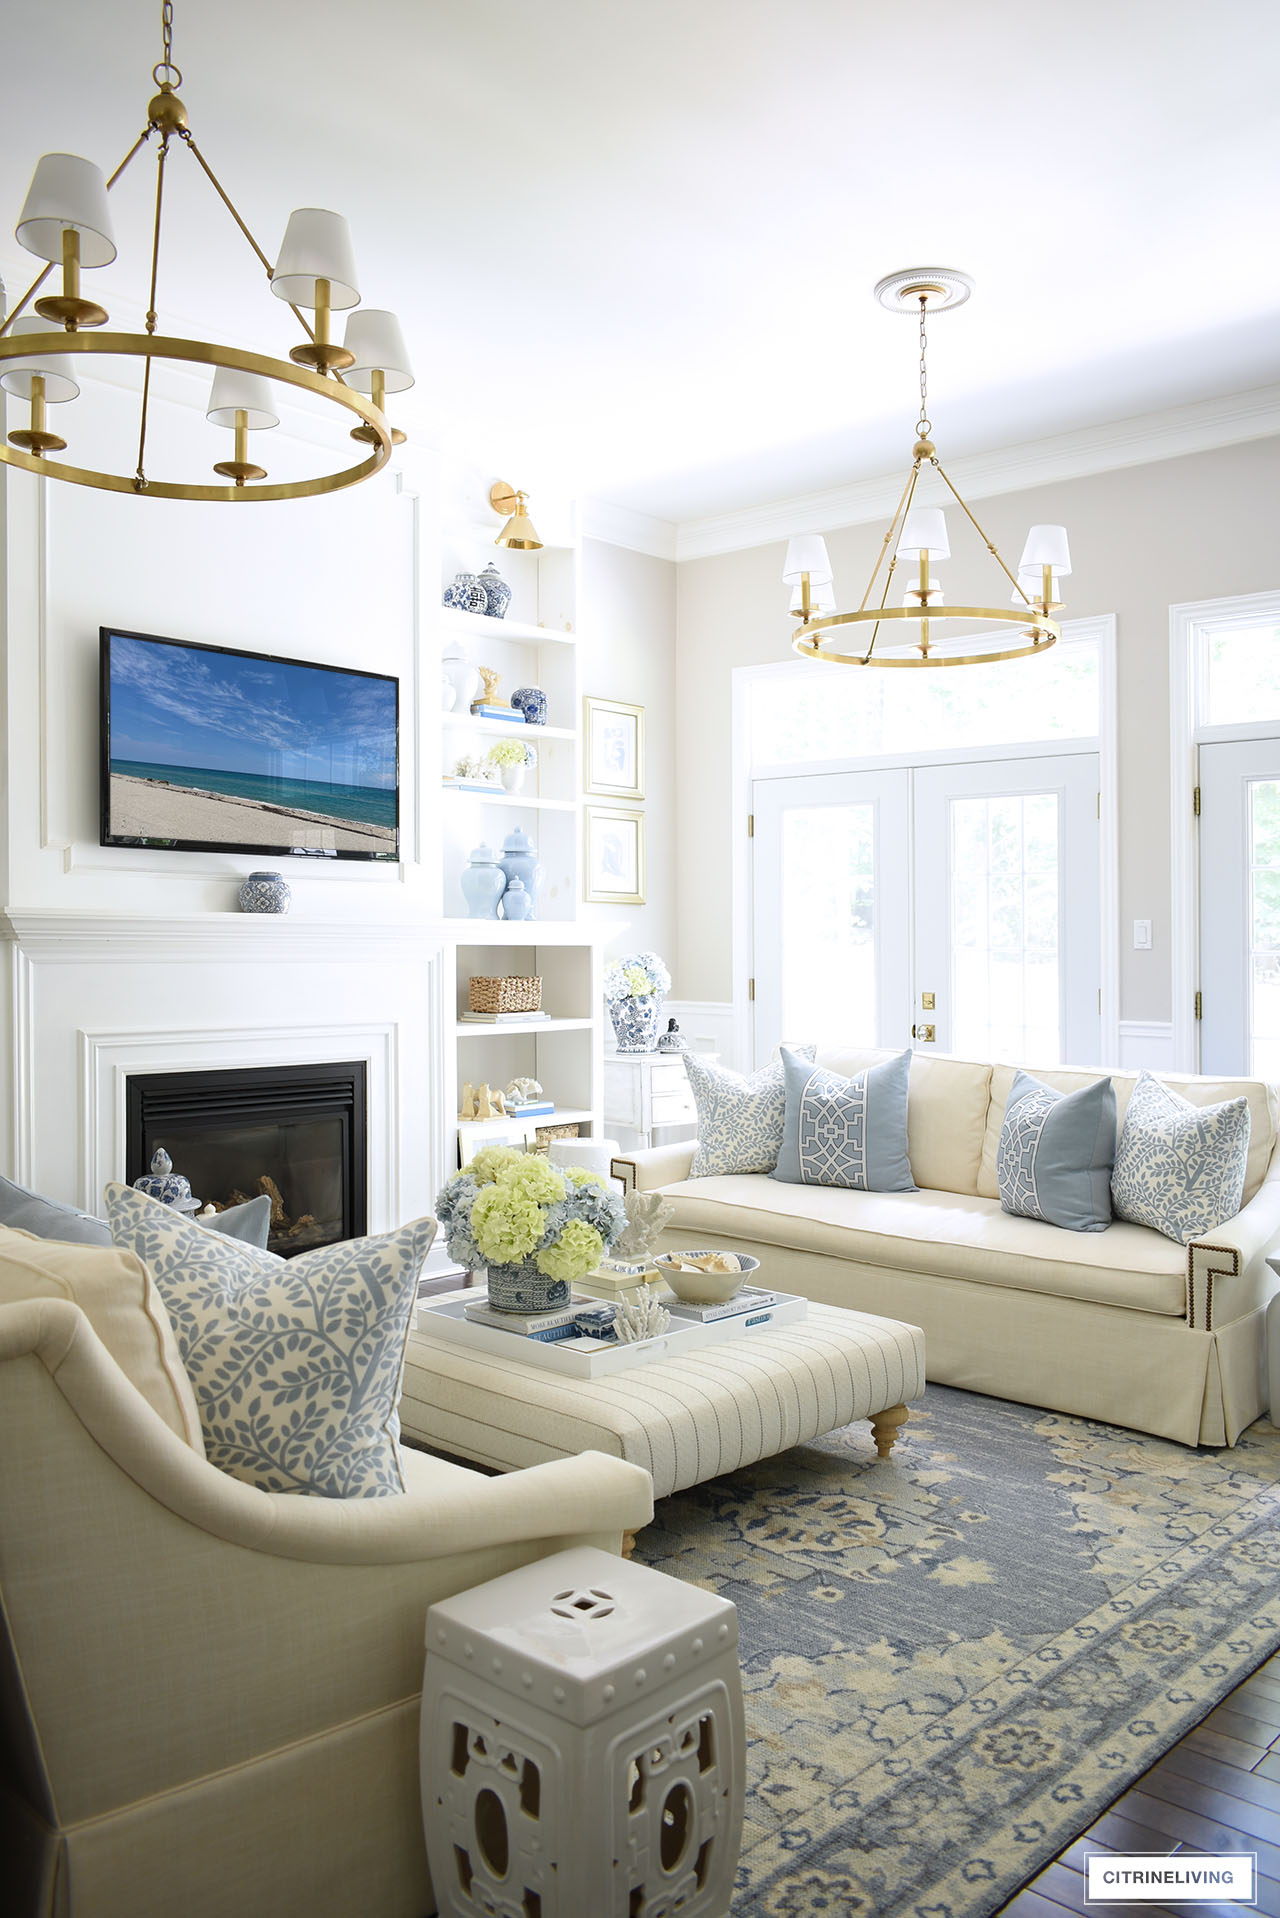 Living room decorated for summer in a soft blue and warm white color palette.